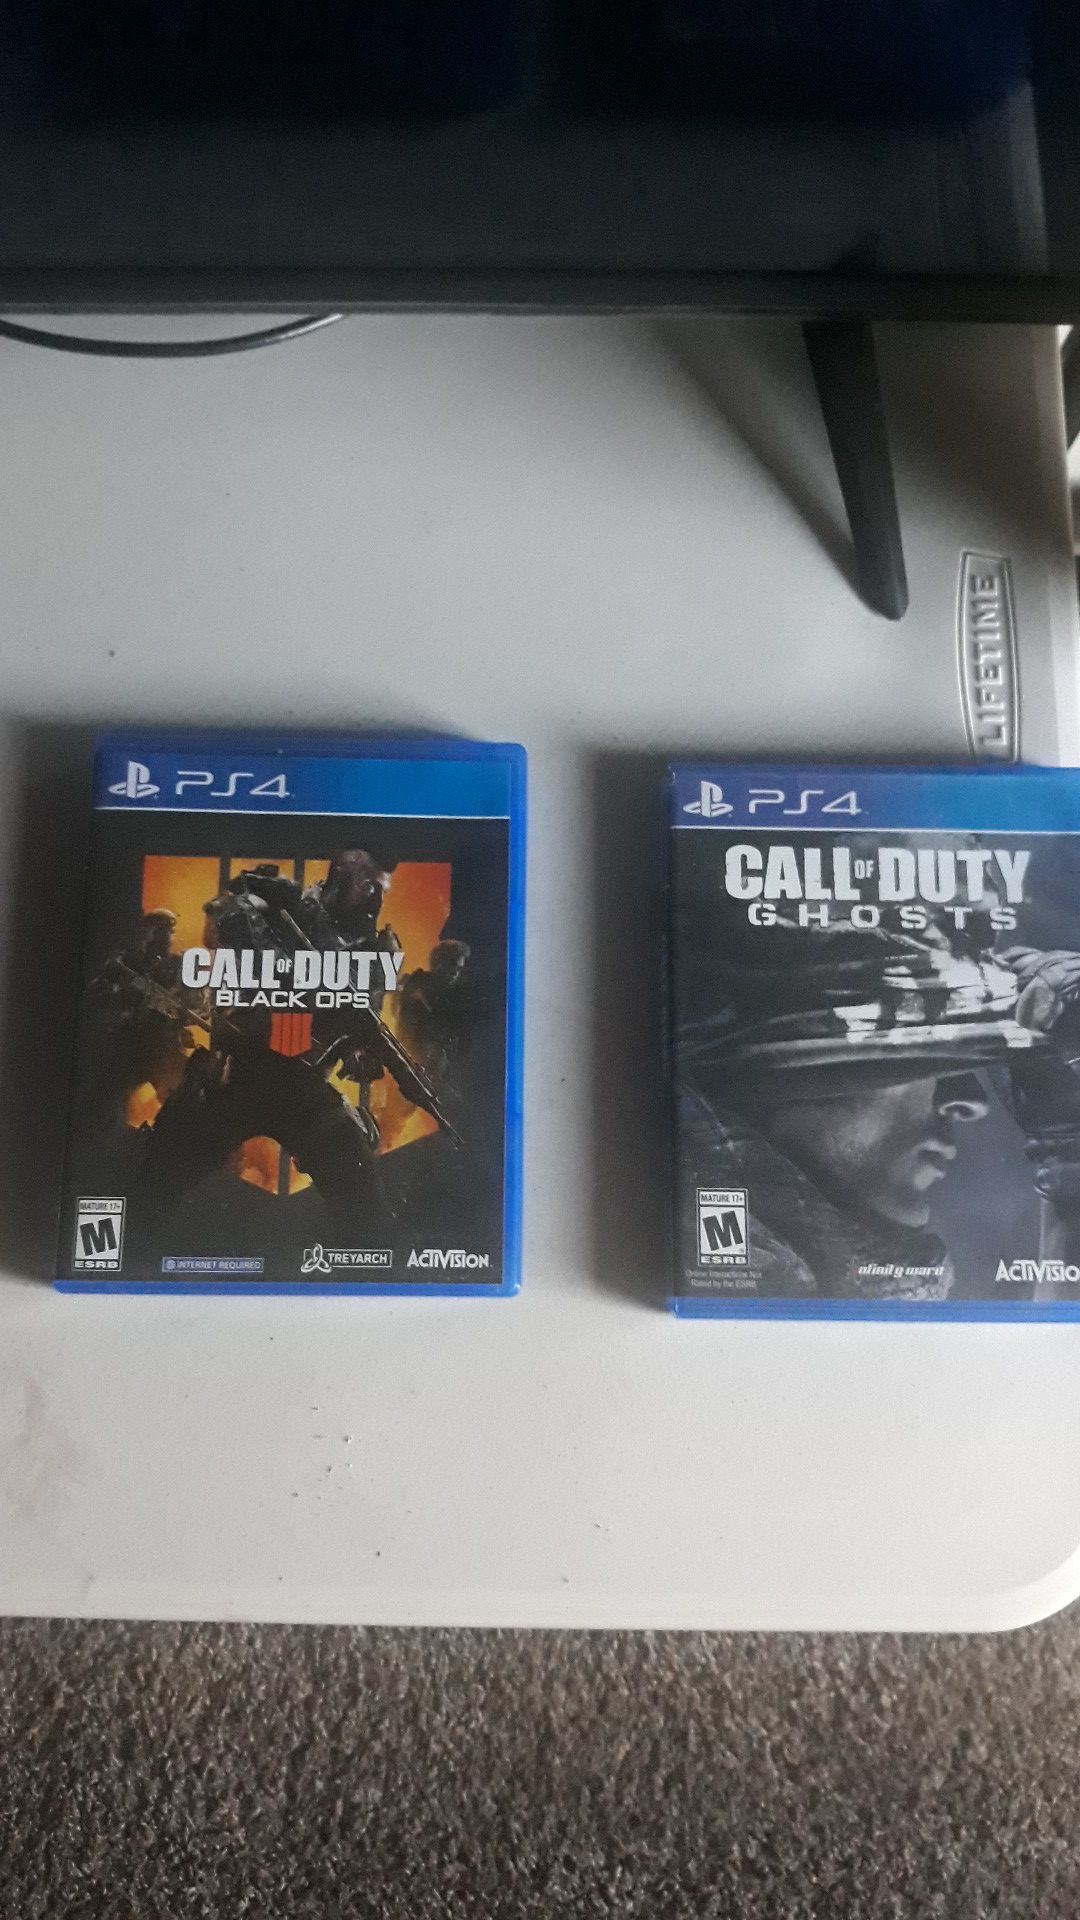 Call of duty ghosts and black ops 4